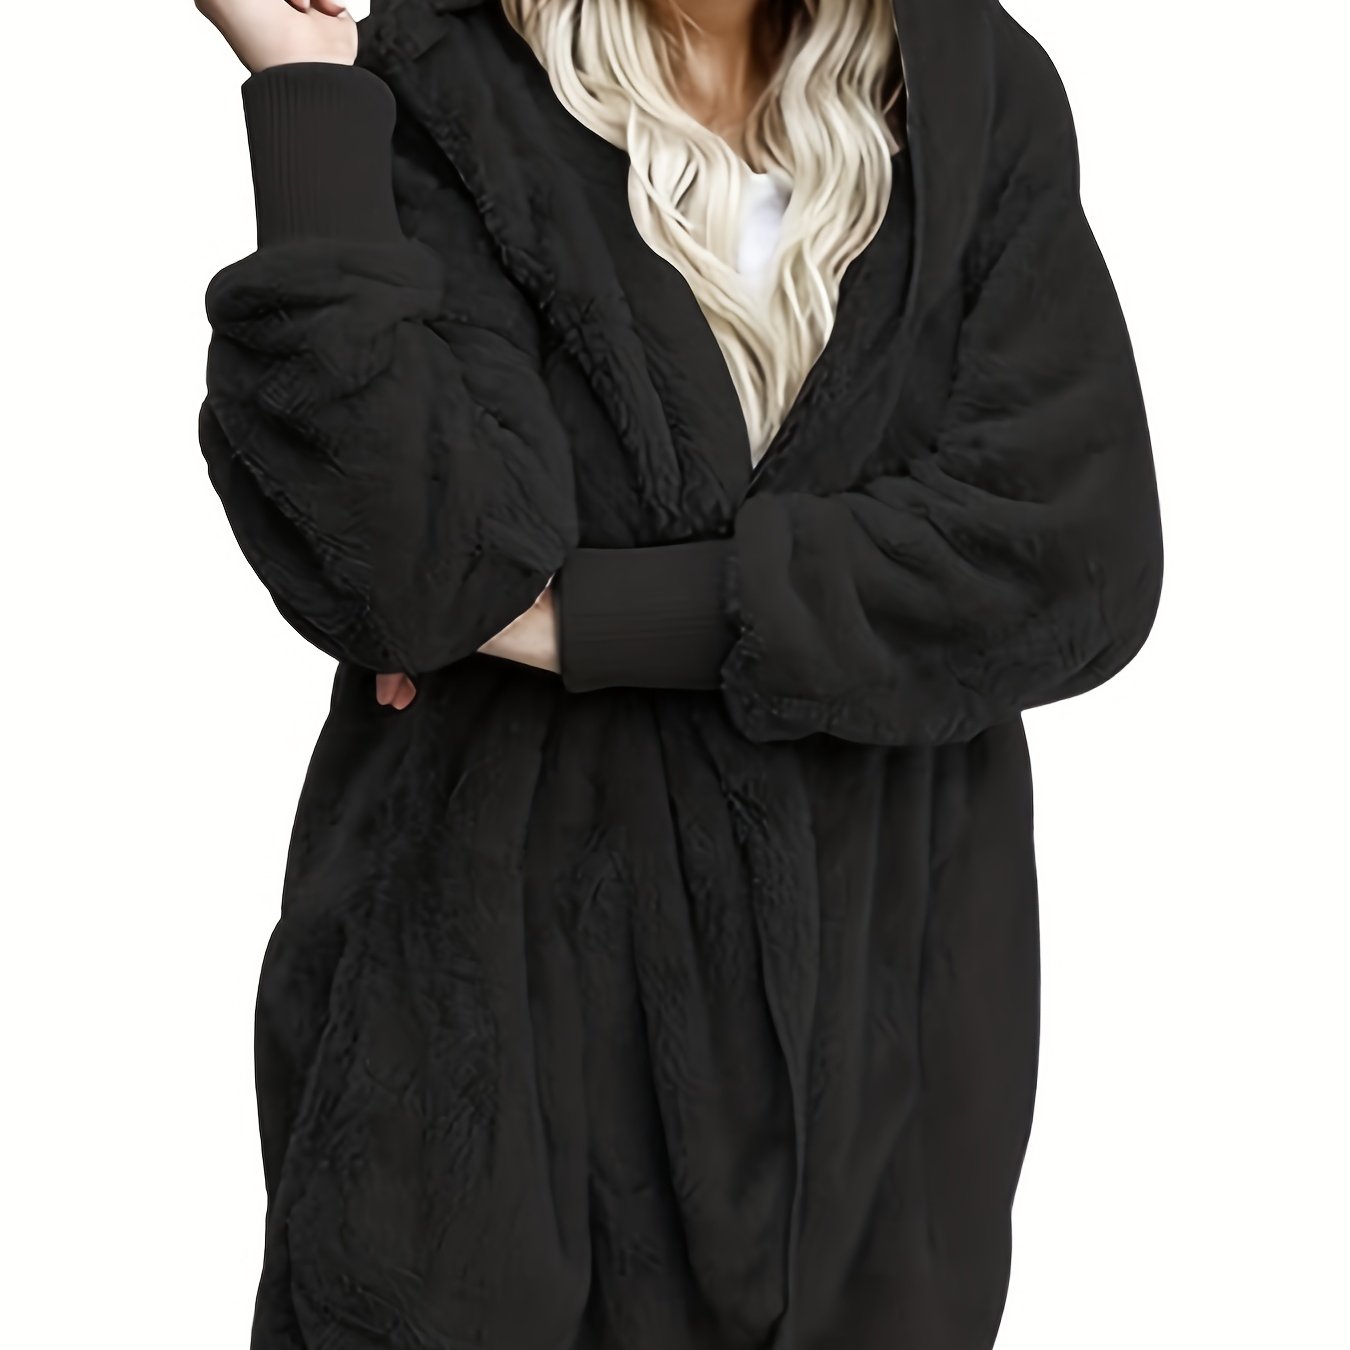 Solid Hooded Fuzzy Coat, Casual Long Sleeve Open Front Coat For Winter & Fall, Women's Clothing